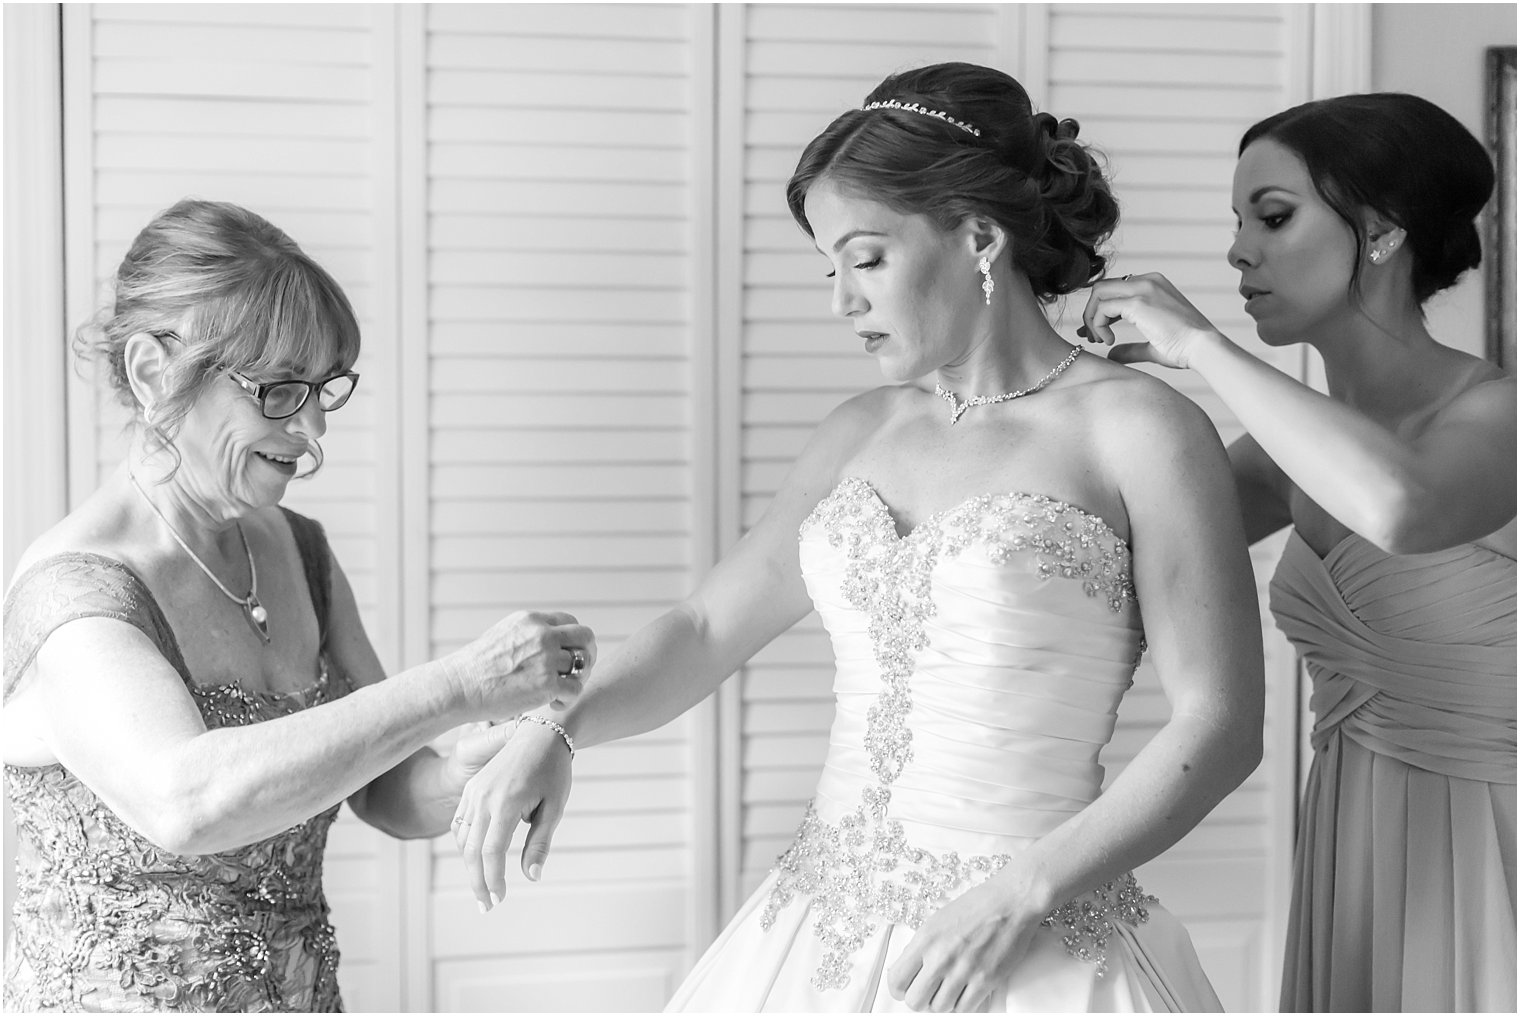 Getting ready with mother and bridesmaid